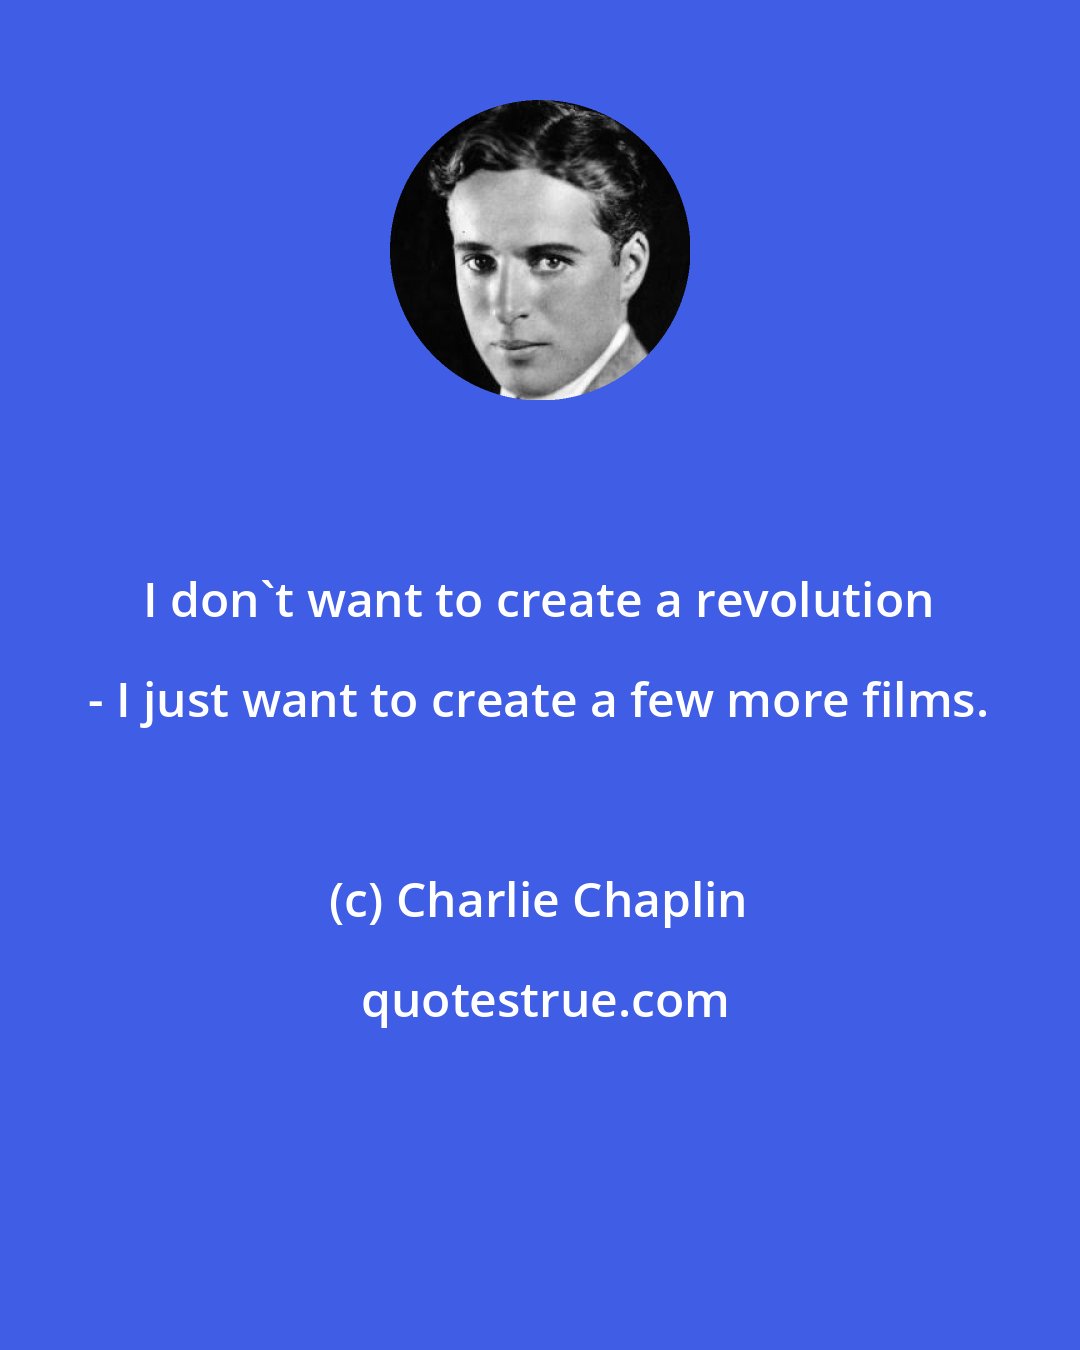 Charlie Chaplin: I don't want to create a revolution - I just want to create a few more films.